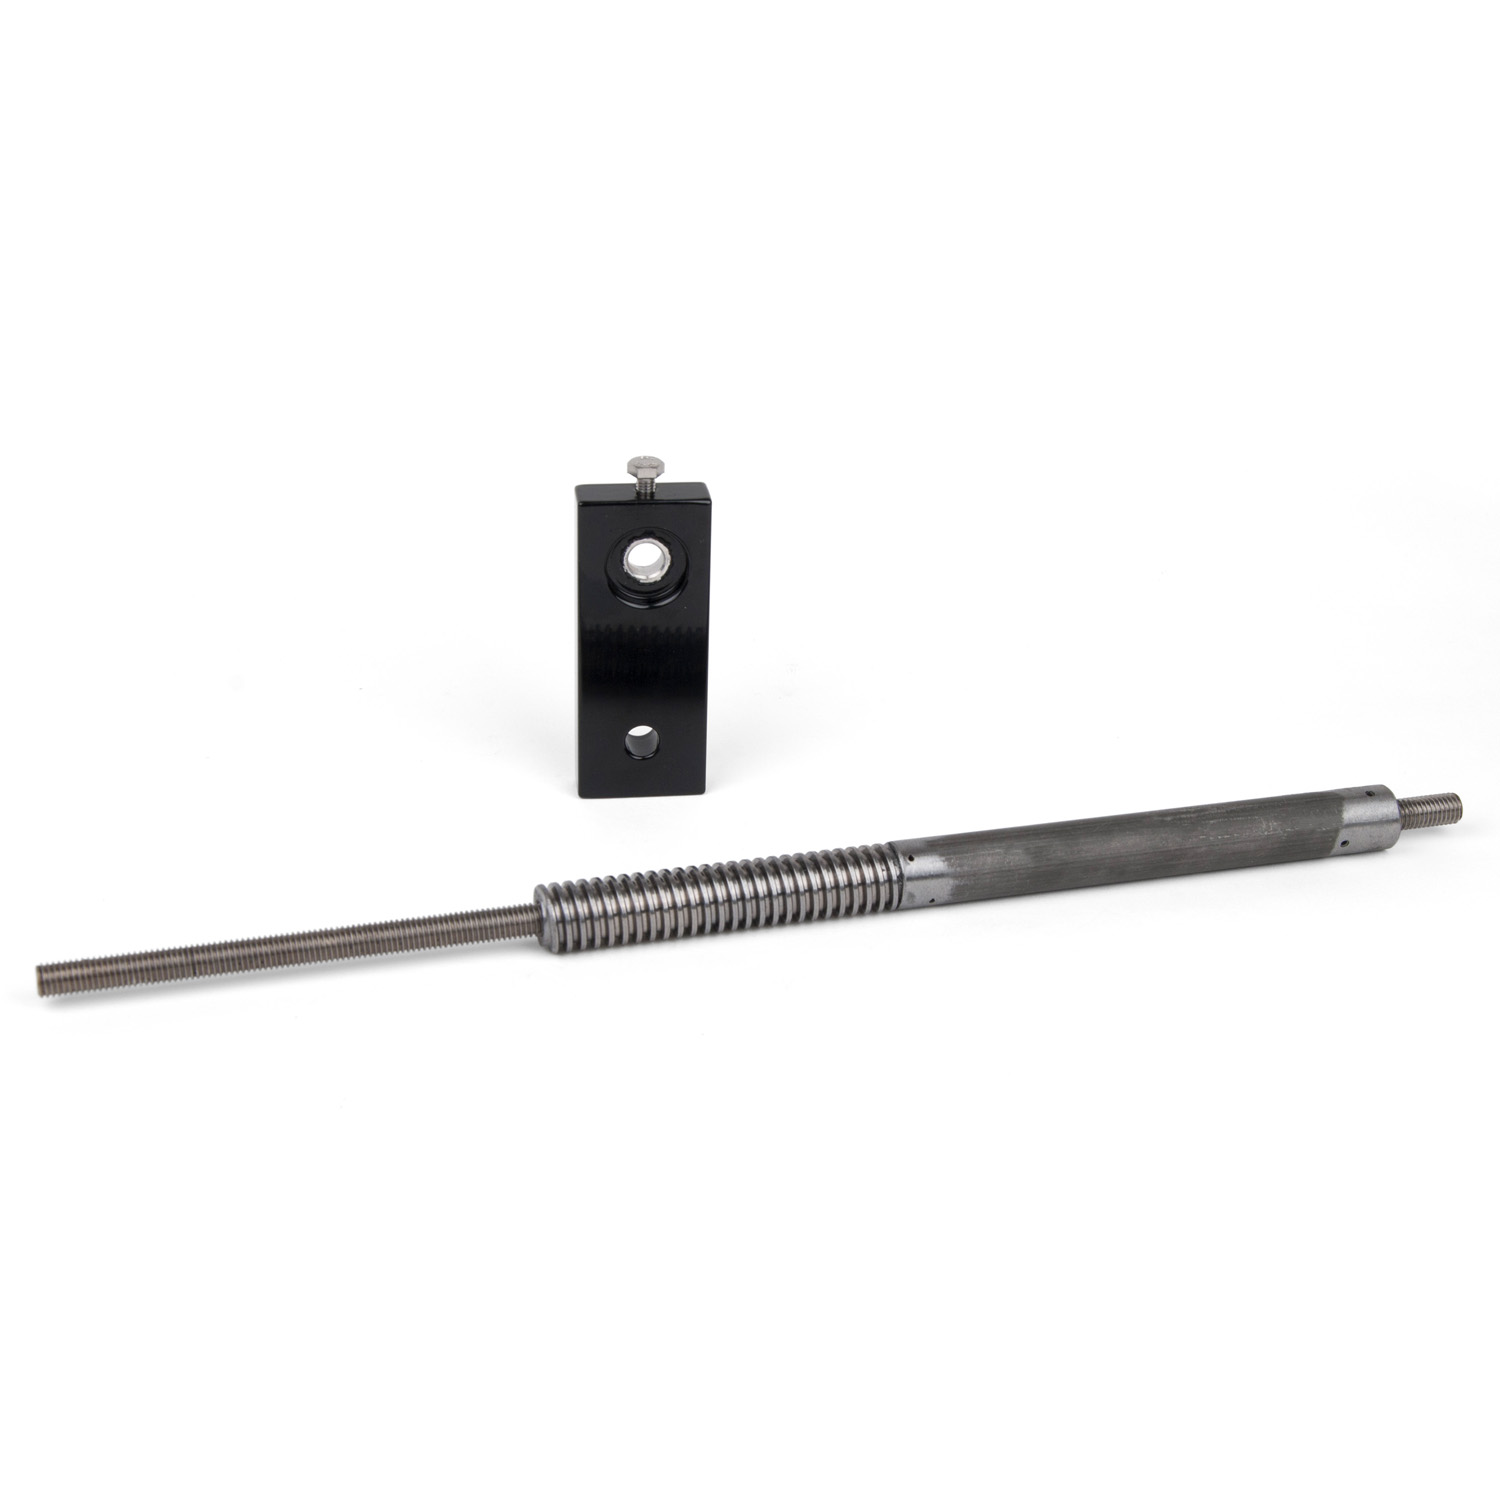 EFN-106 Connection rod with spindle, specify serial nr.